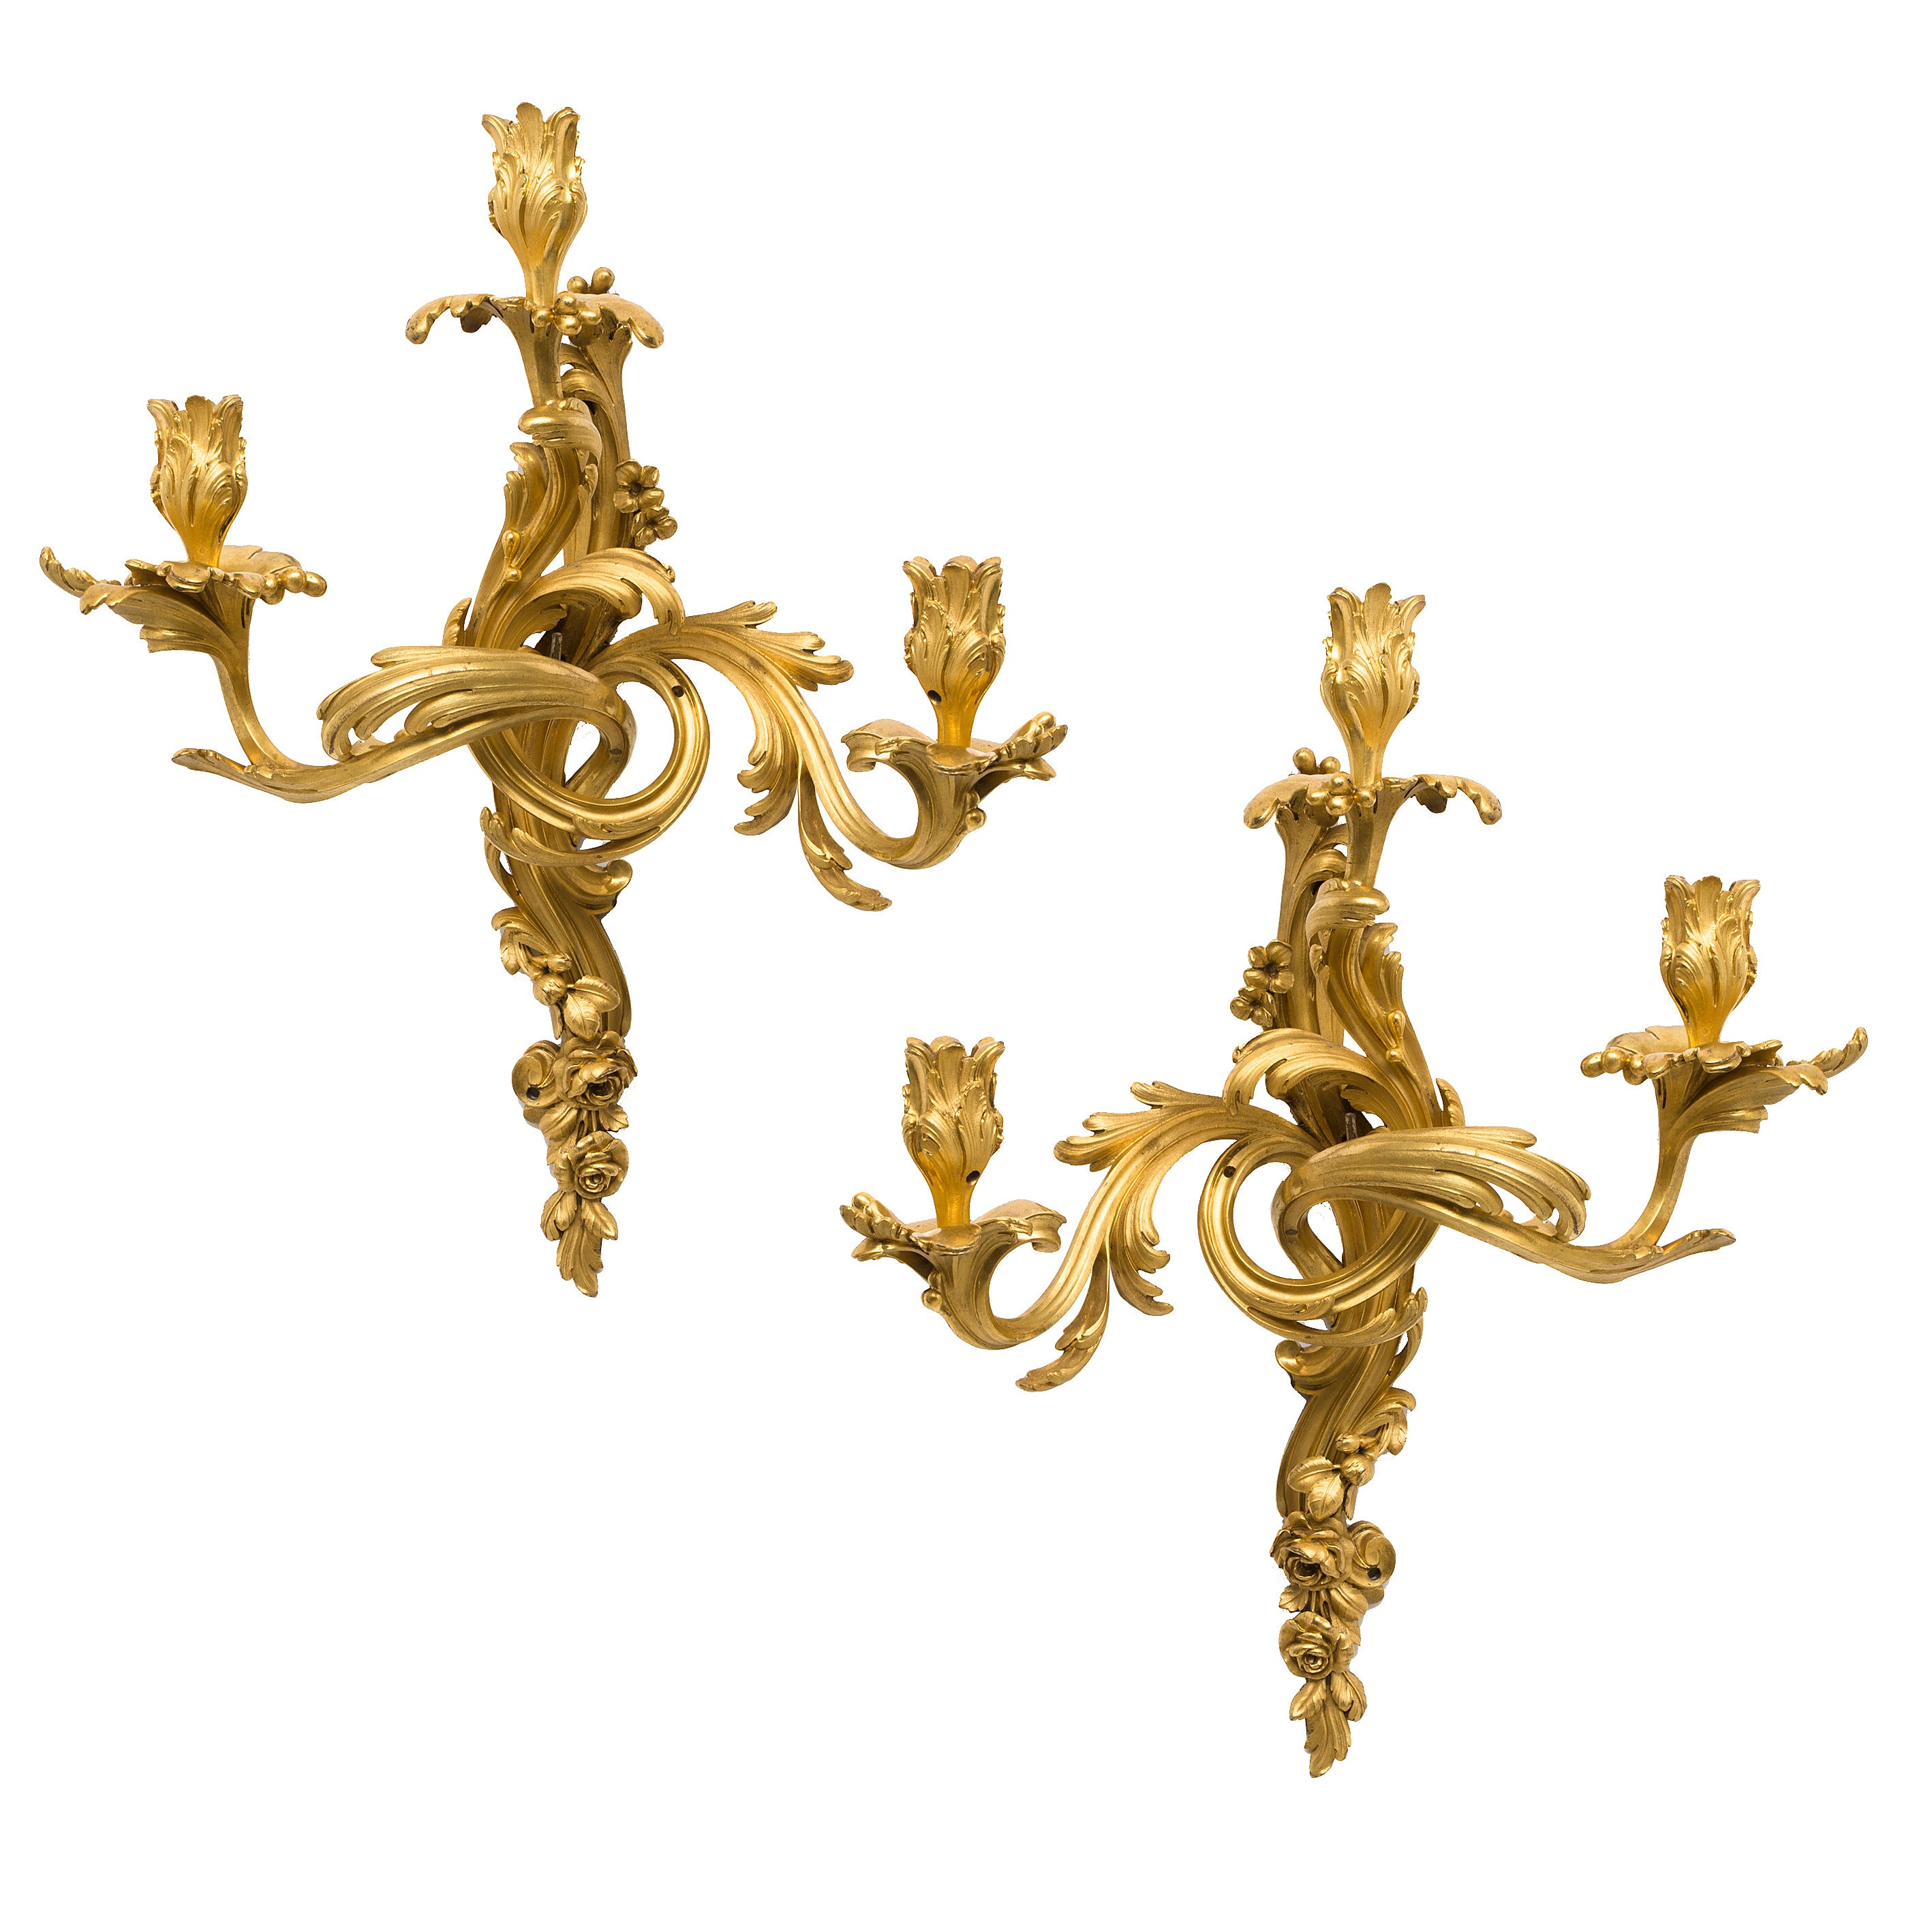 Pair Glamourous French Ormolu Rococo Wall Sconces c.1850